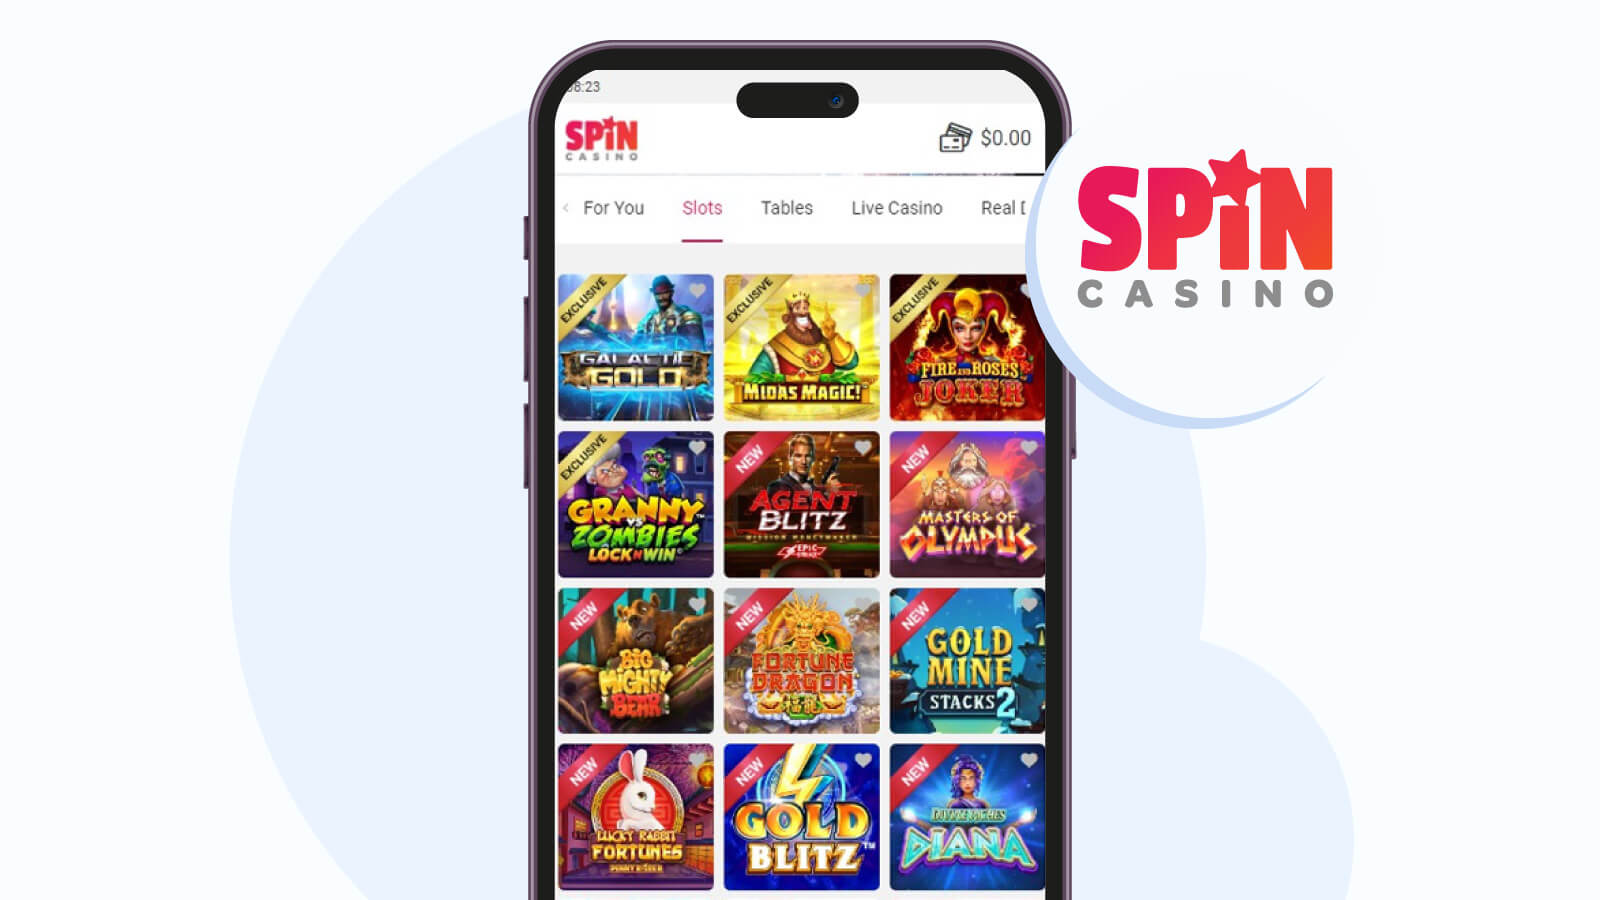 Spin-Casino-best-1-dollar-deposit-casino-for-Android